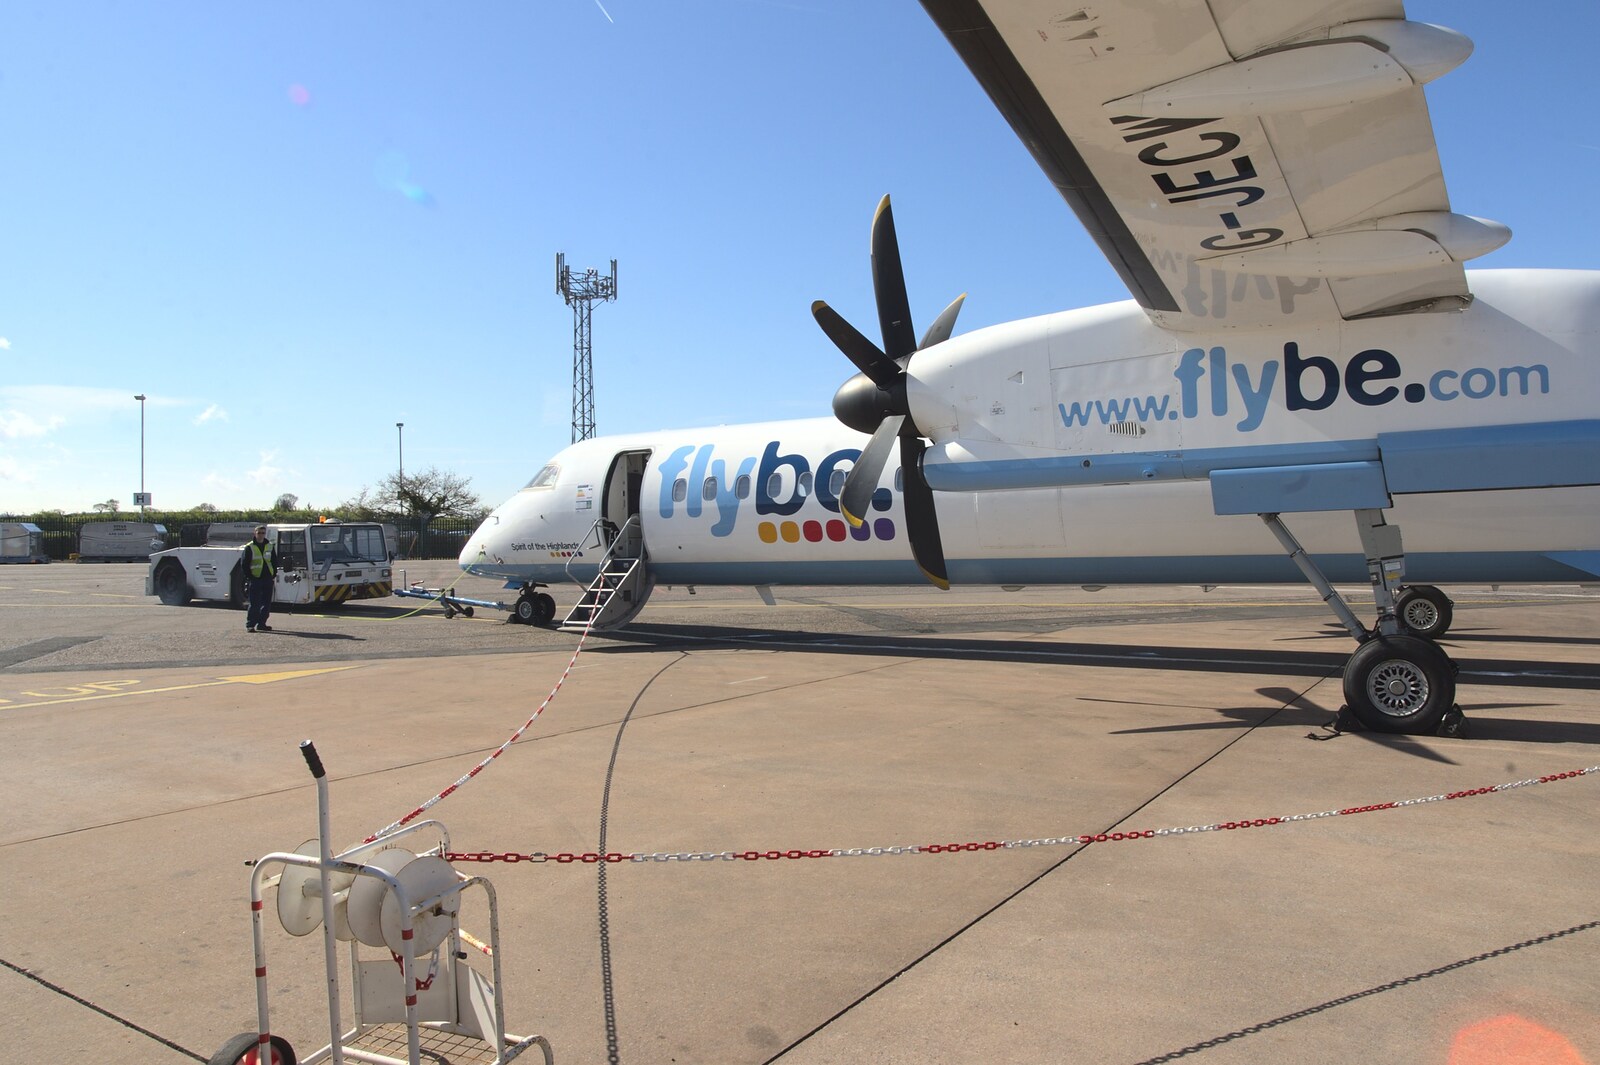 At Exeter airport, our Flybe Dash-8 Q400 awaits from An Easter Weekend in Chagford, Devon - 12th April 2009